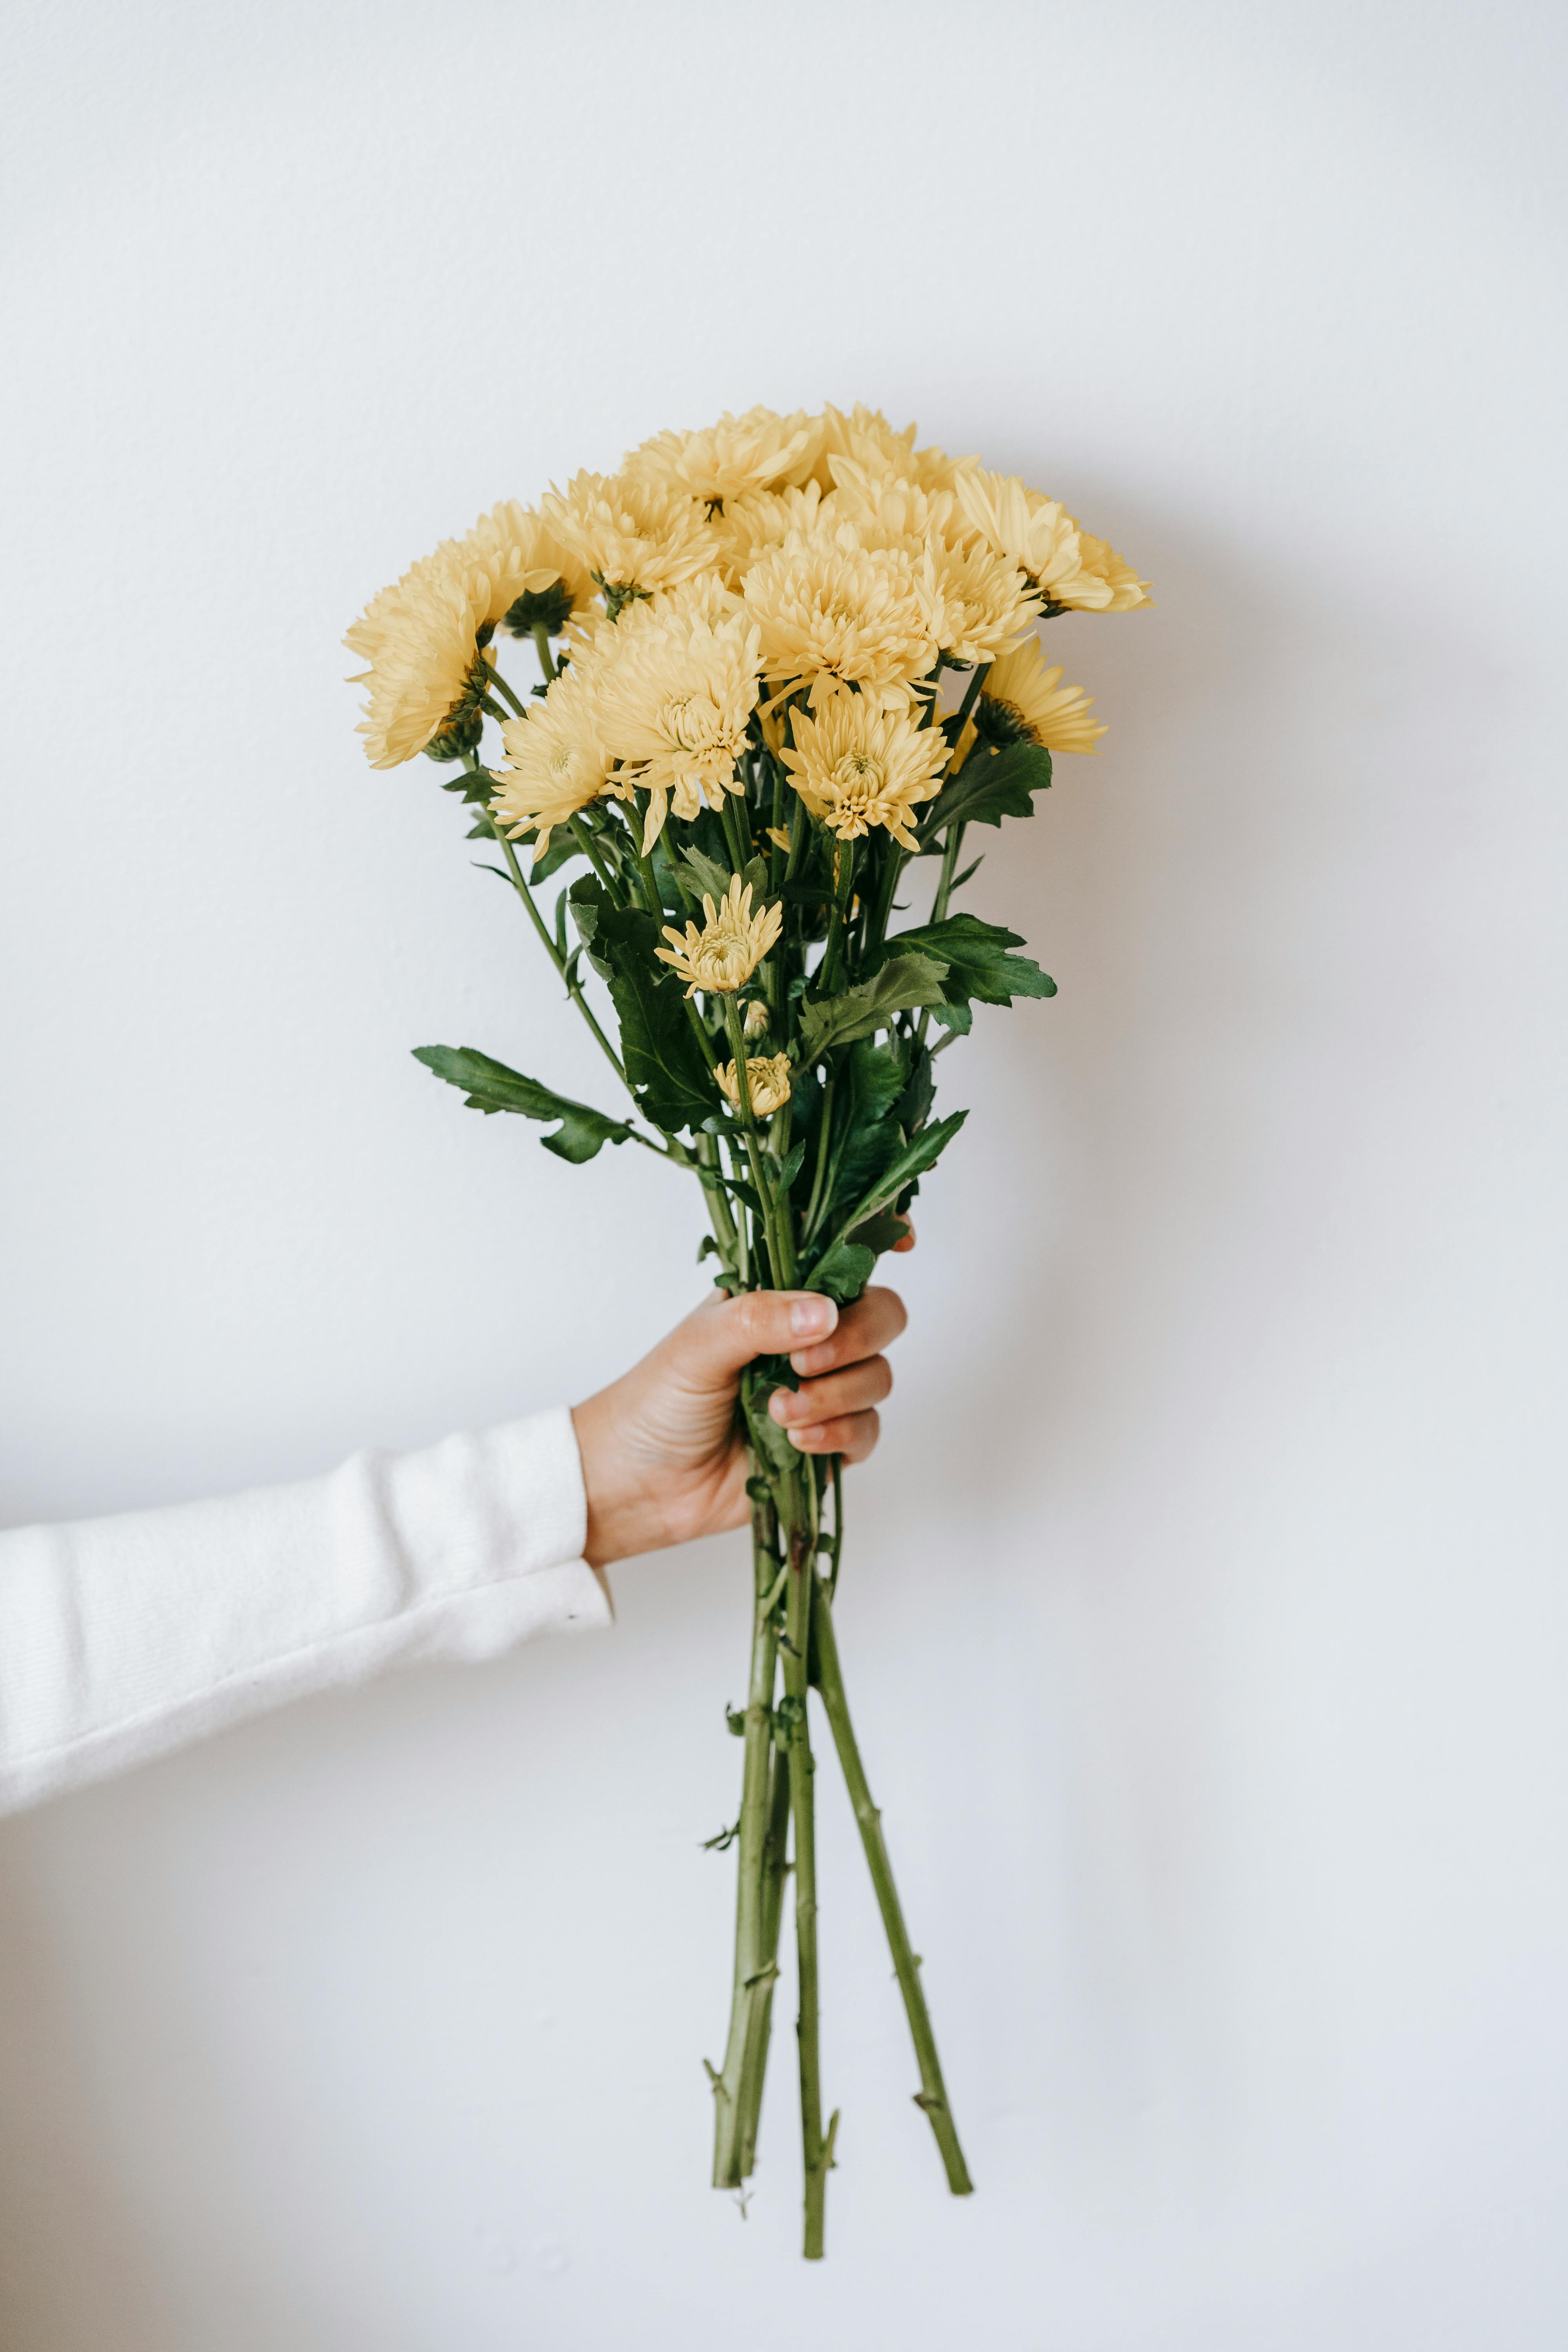 faceless person with blooming chrysanthemum bouquet on white background